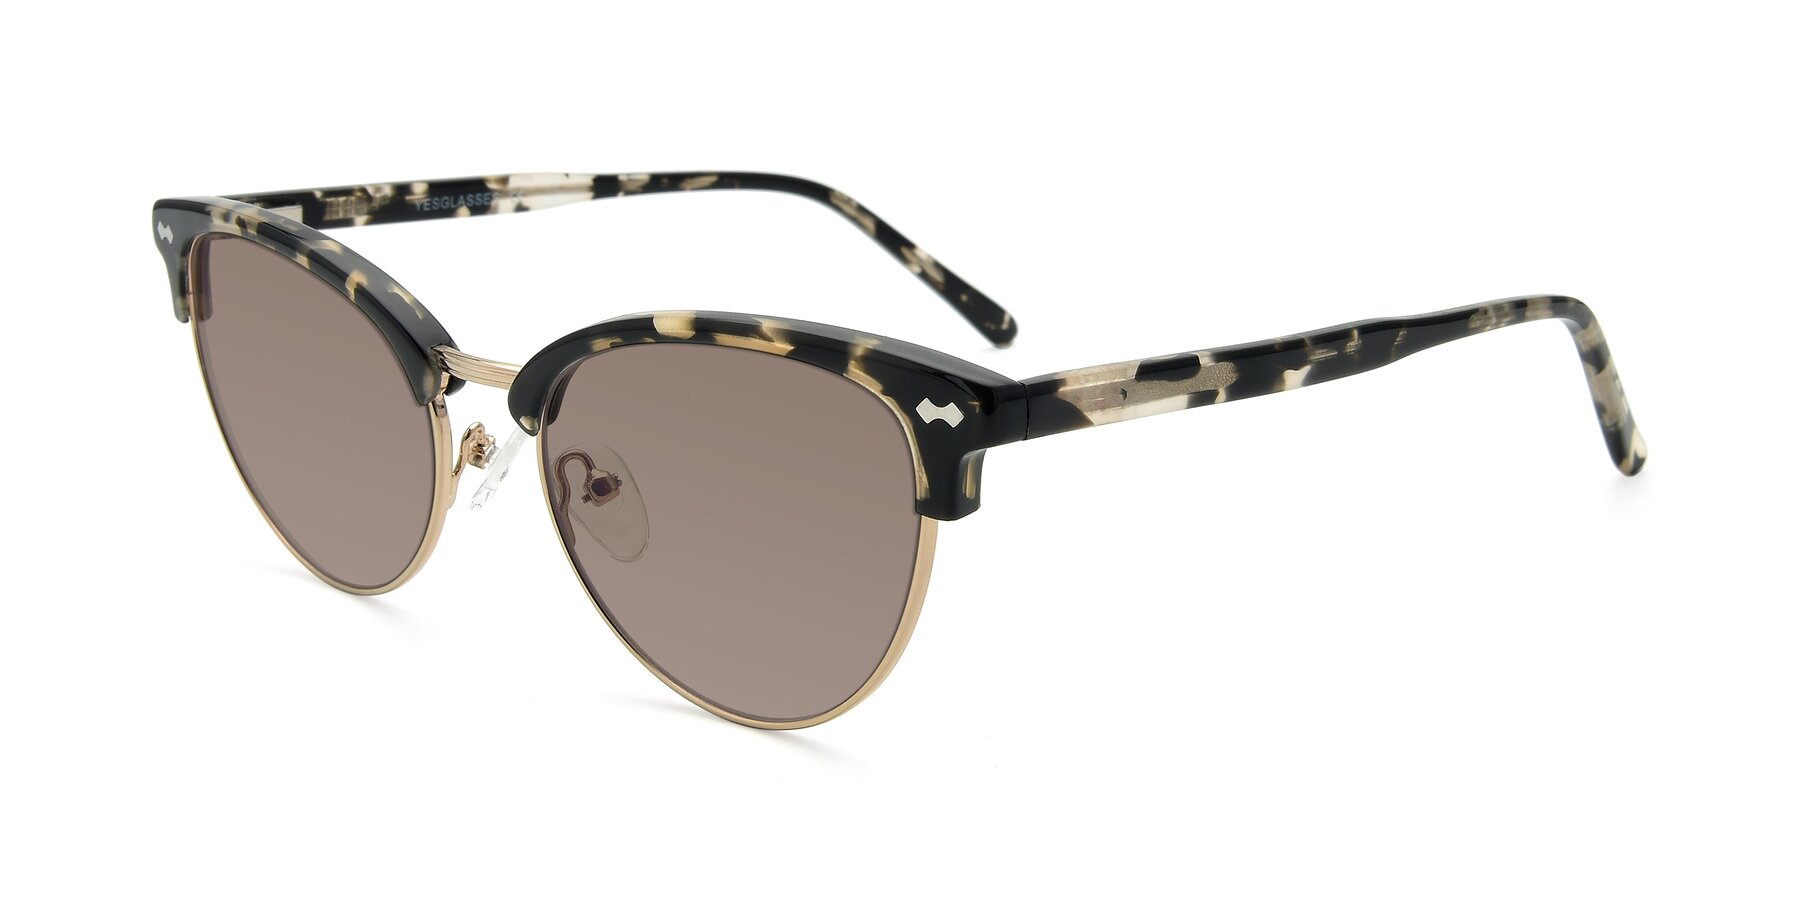 Angle of 17461 in Tortoise-Gold with Medium Brown Tinted Lenses